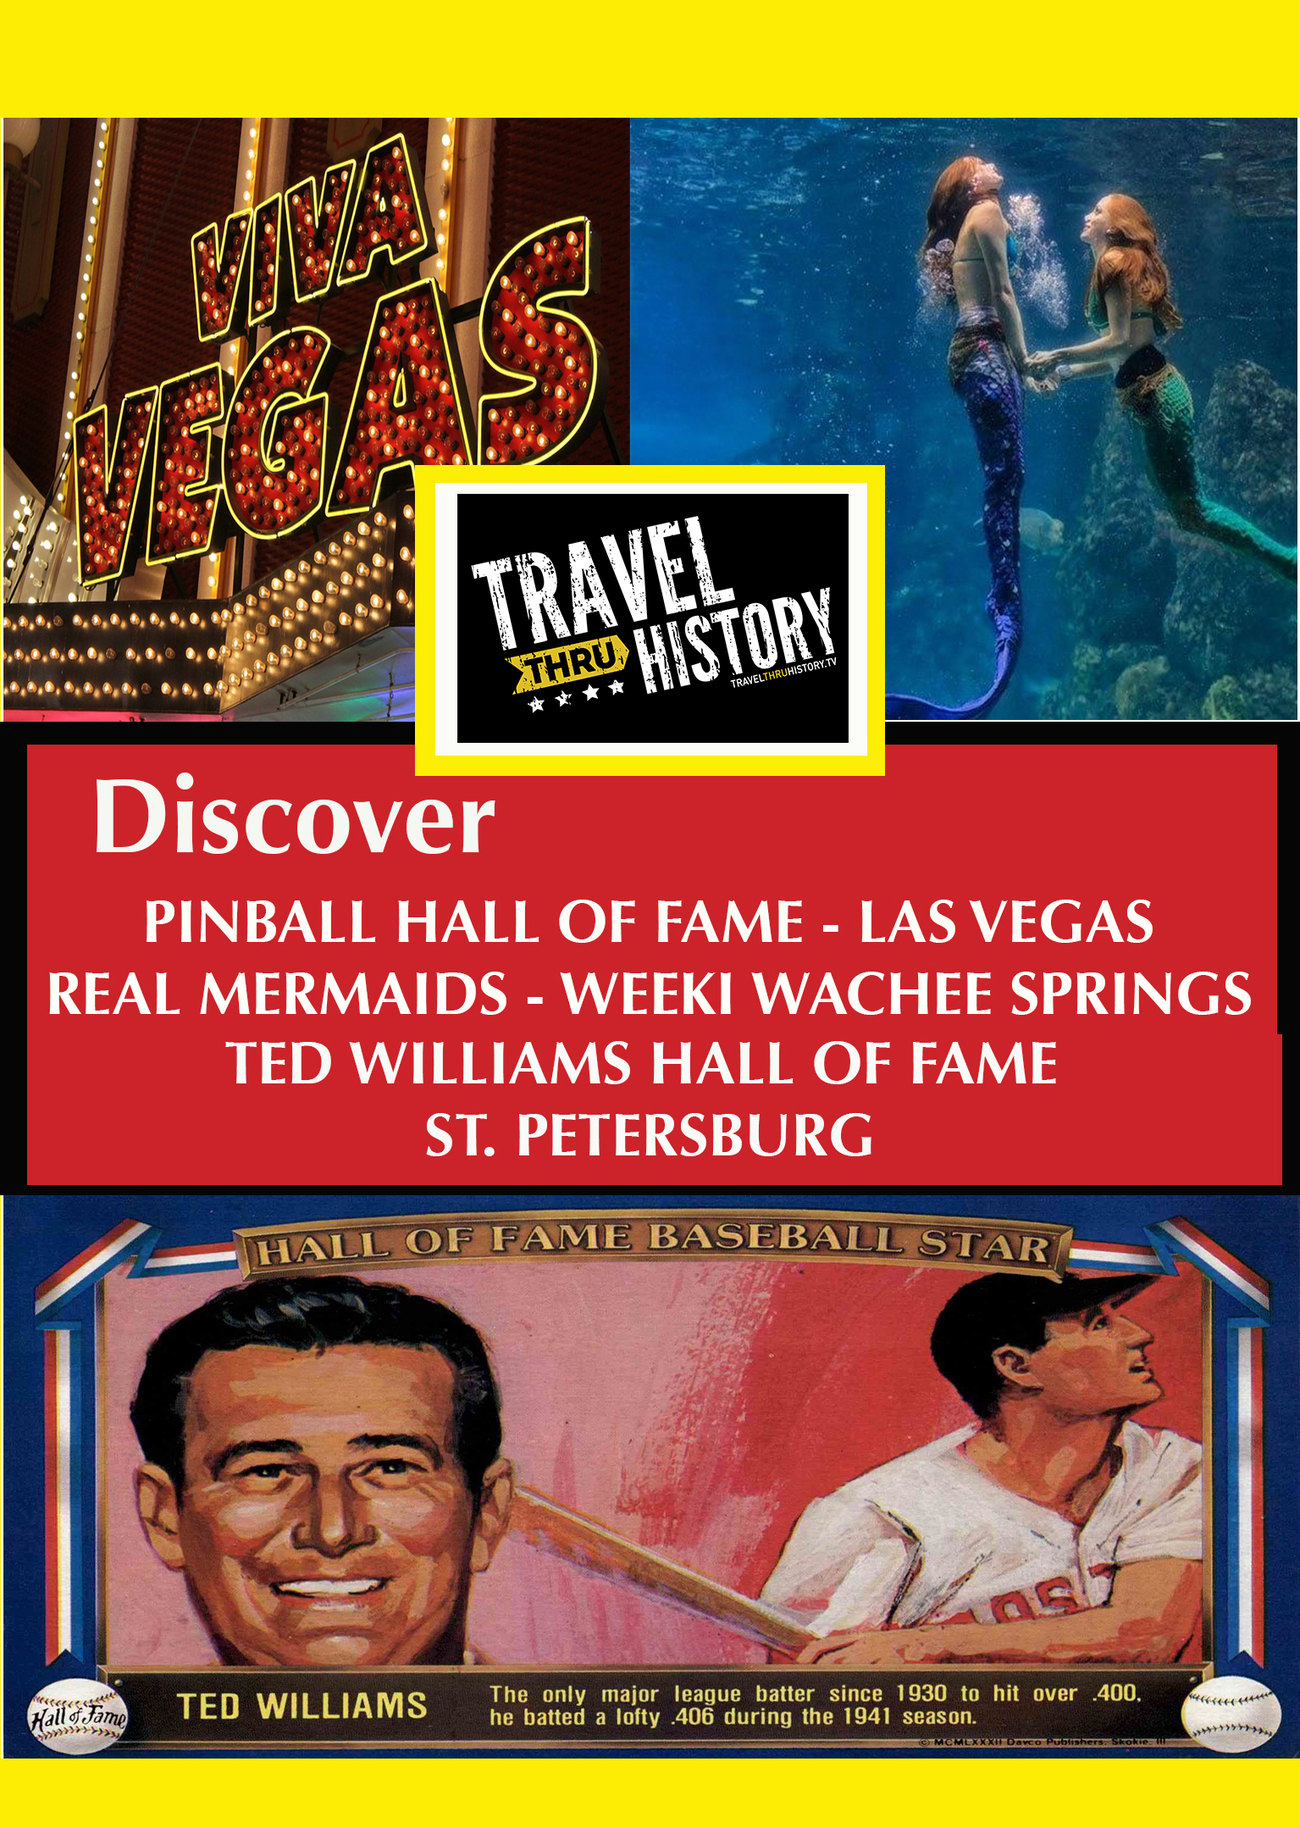 T8971 - Odds and Ends: Pinball Hall of Fame Museum  Las Vegas, Real Mermaids - Weeki Wachee Springs, Ted Williams Hitters Hall of Fame, St. Petersburg